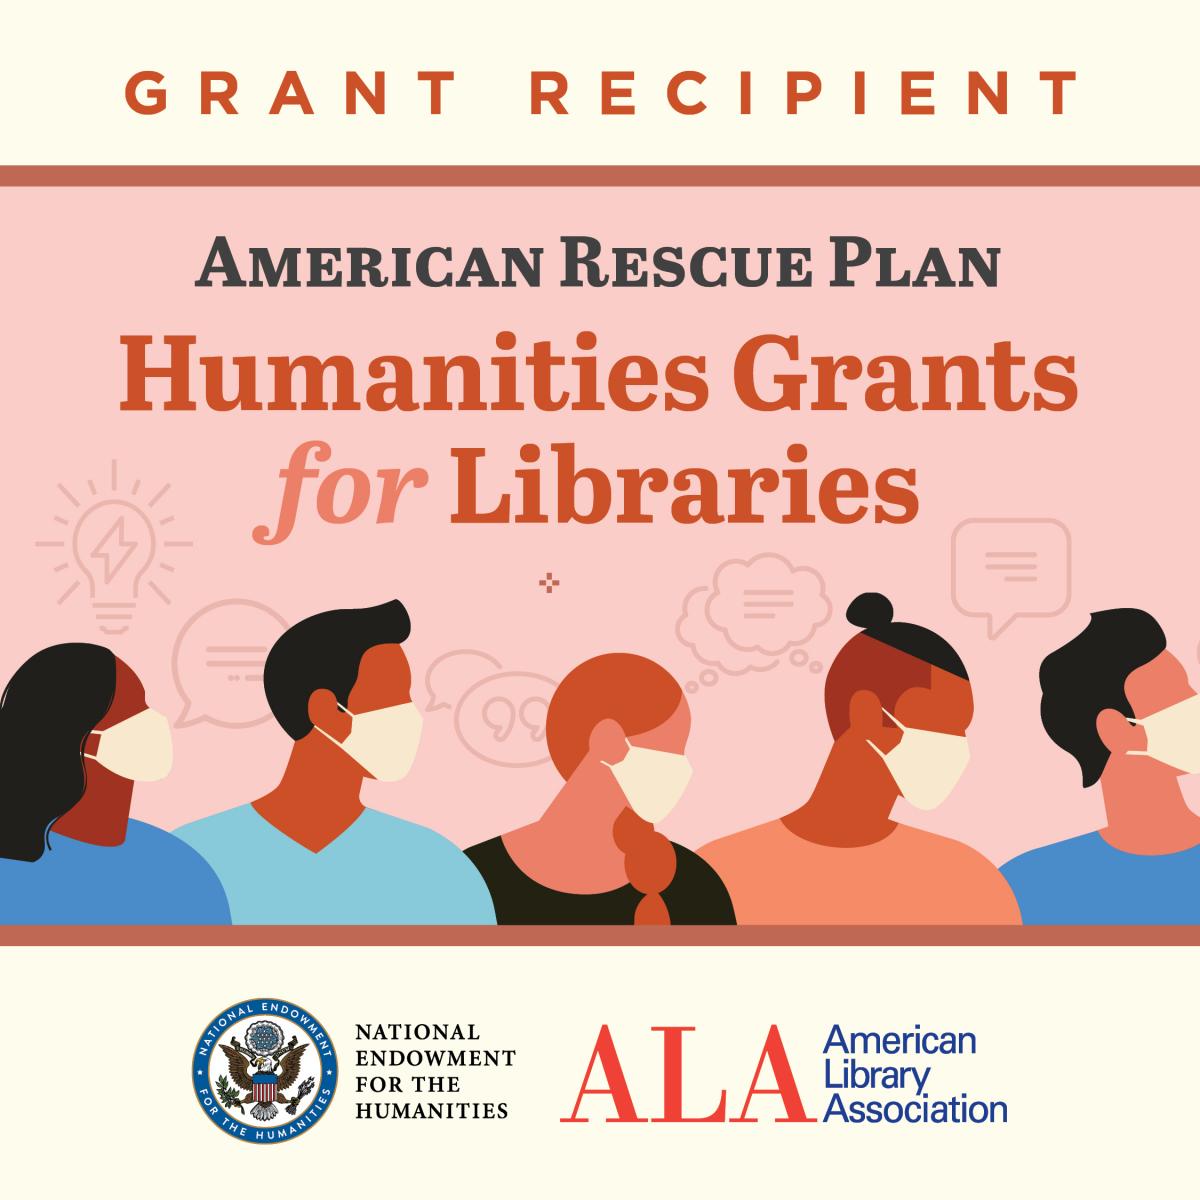 an image with 4 drawn people wearing mask with the words American Rescue Plan Humanities Grants for Librarians above them against a pink background